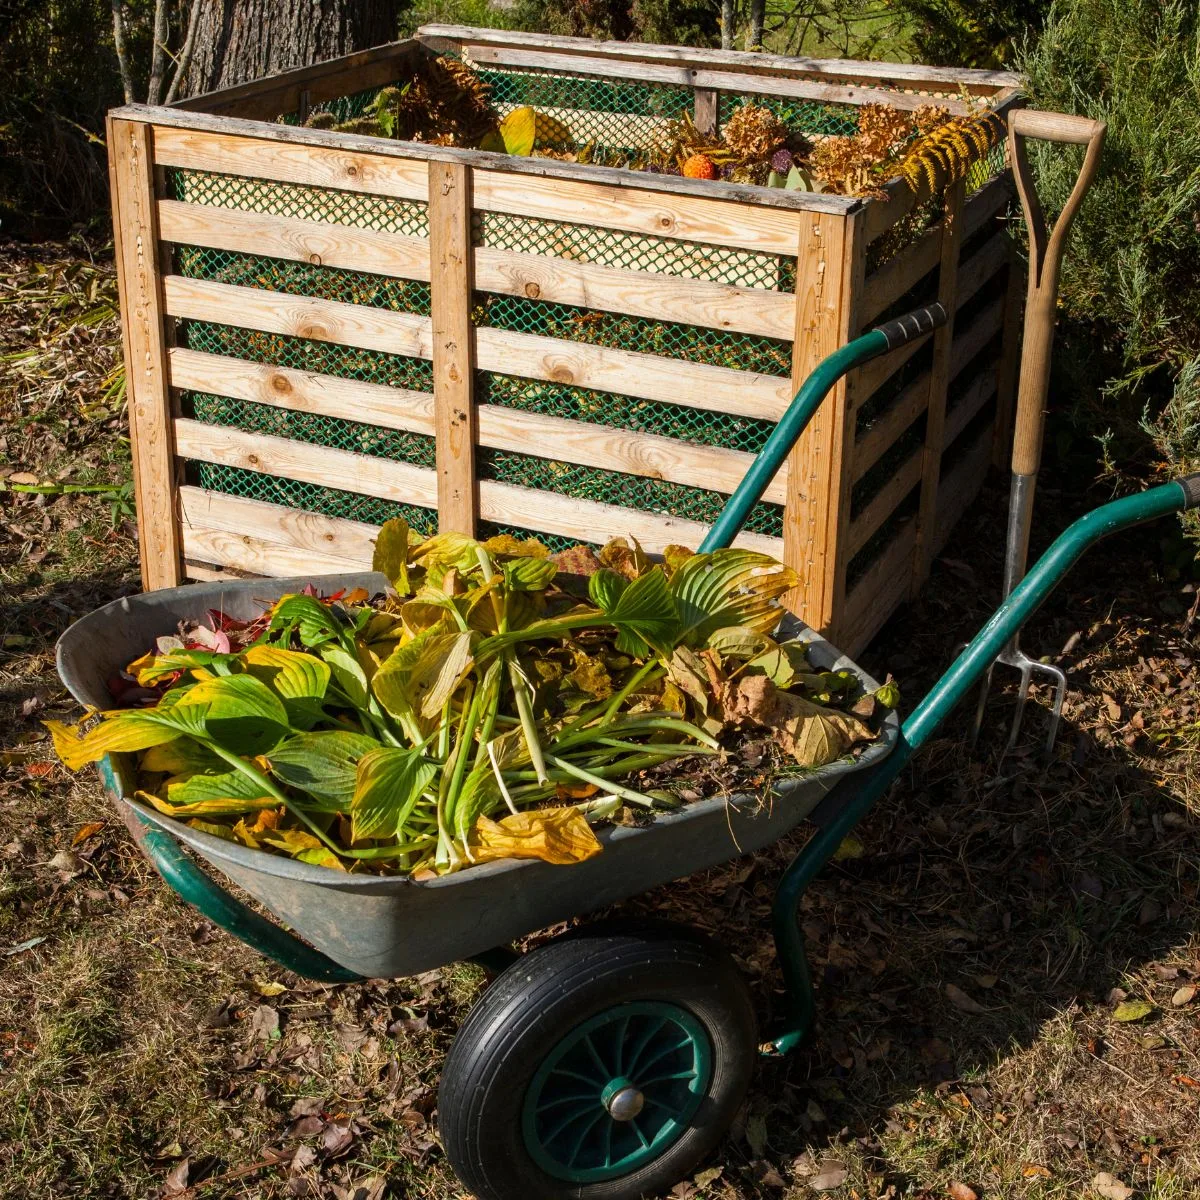 Composting bin and a wheelbarrow filled with green matter.